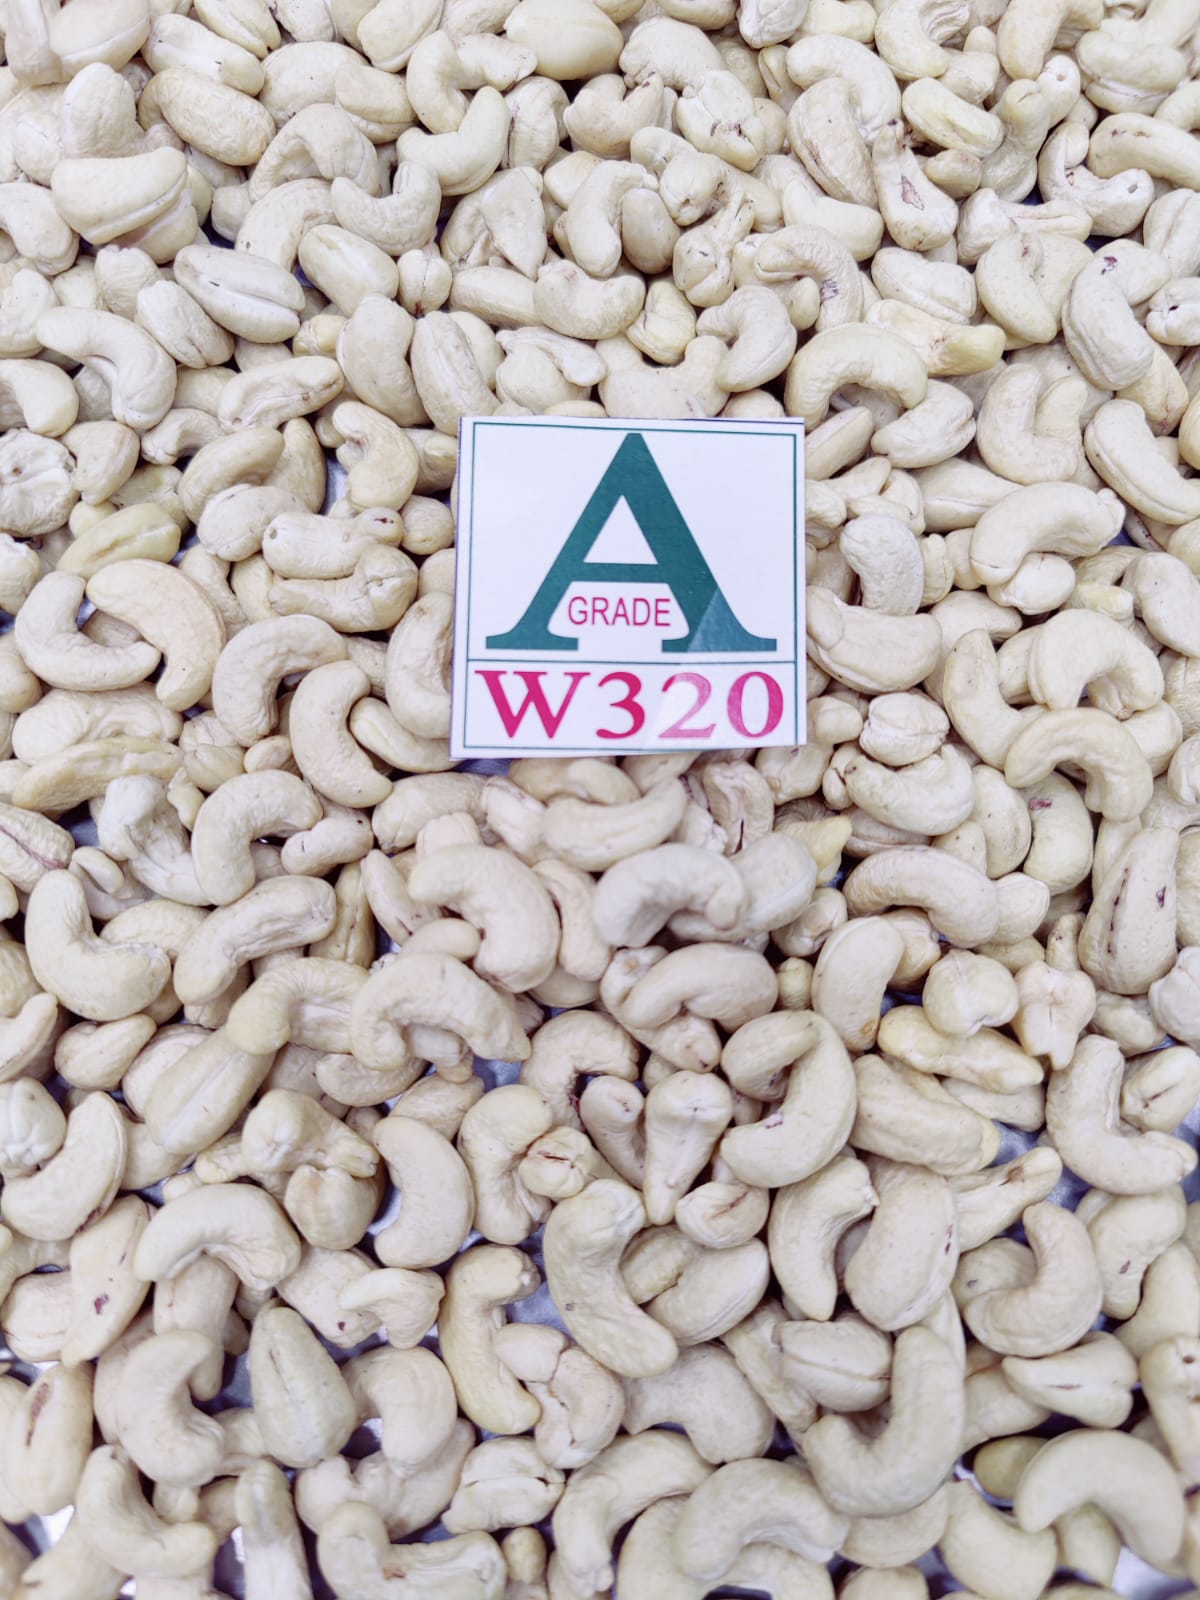 Top Quality Cashew Nuts Grade AW320 from Aditya Nuts & Spices 